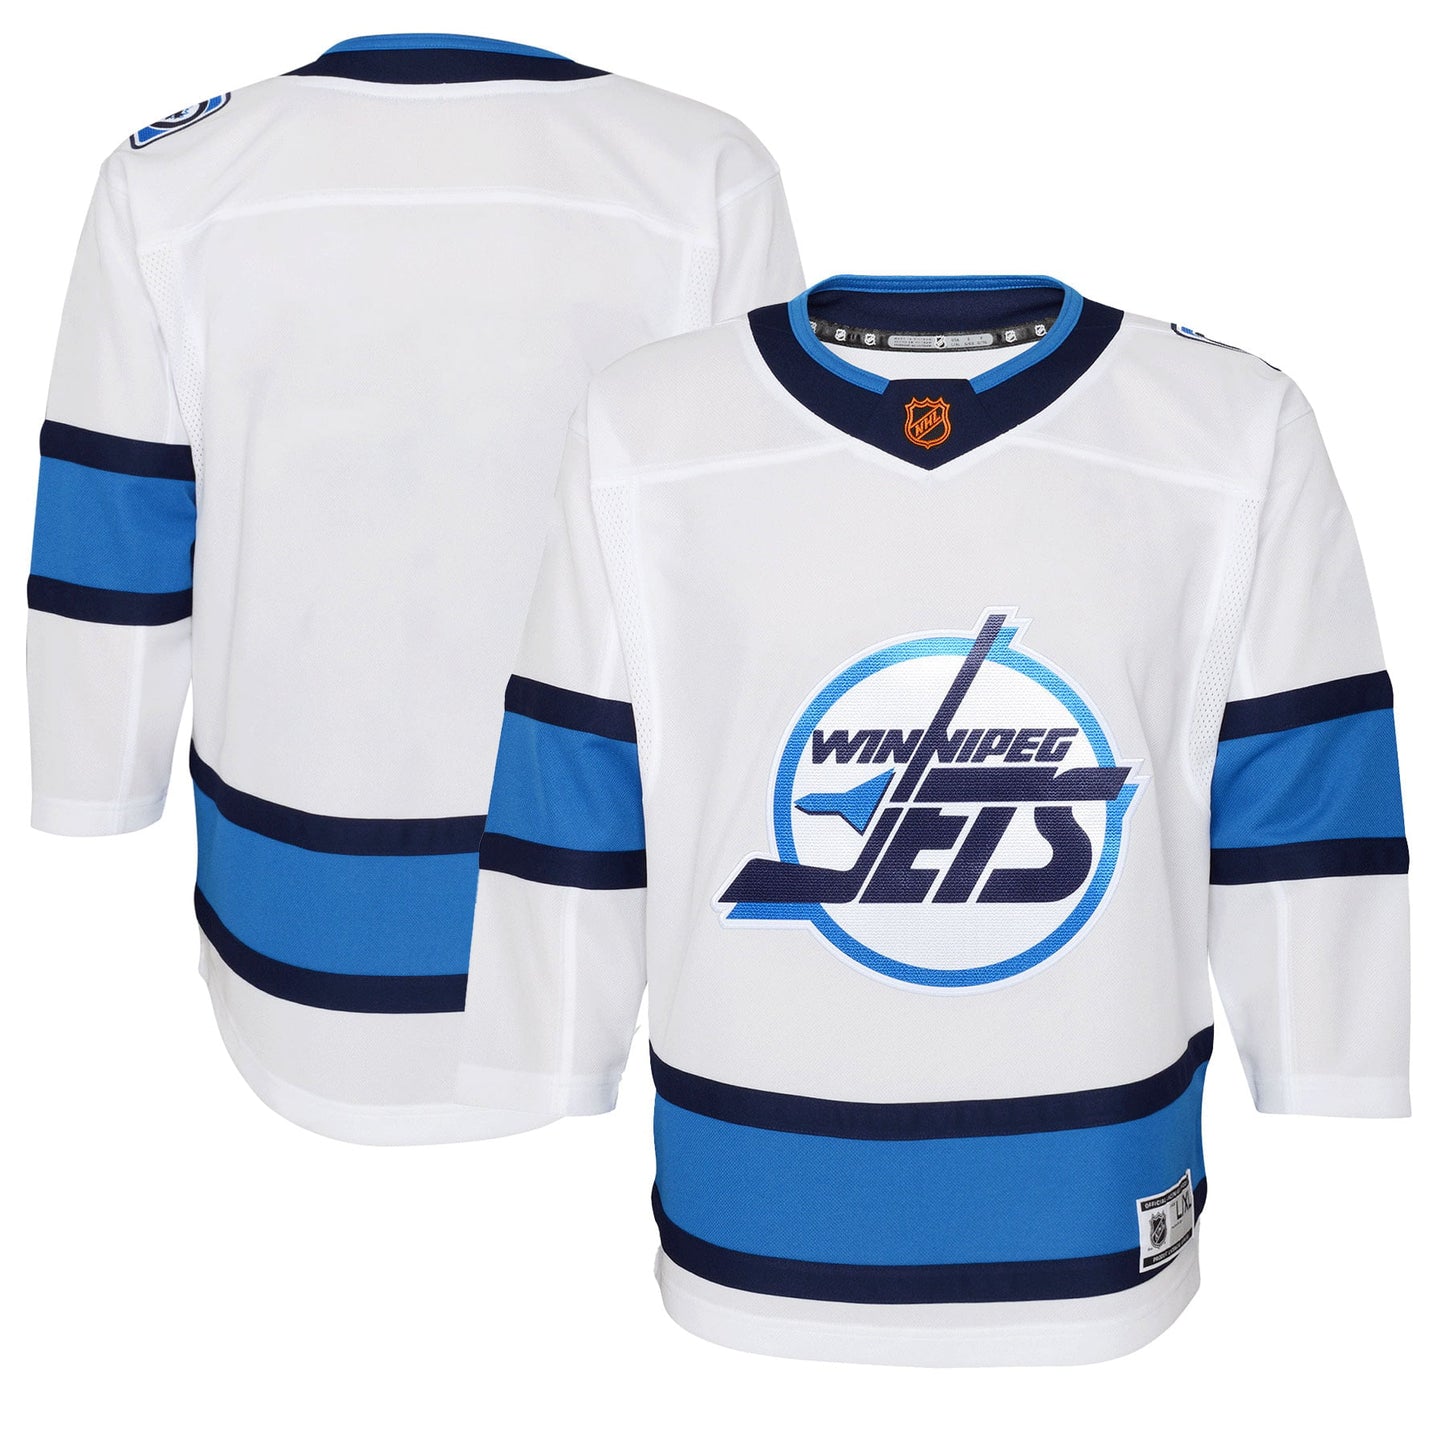 Youth White Winnipeg Jets Special Edition 2.0 Premier Blank Jersey